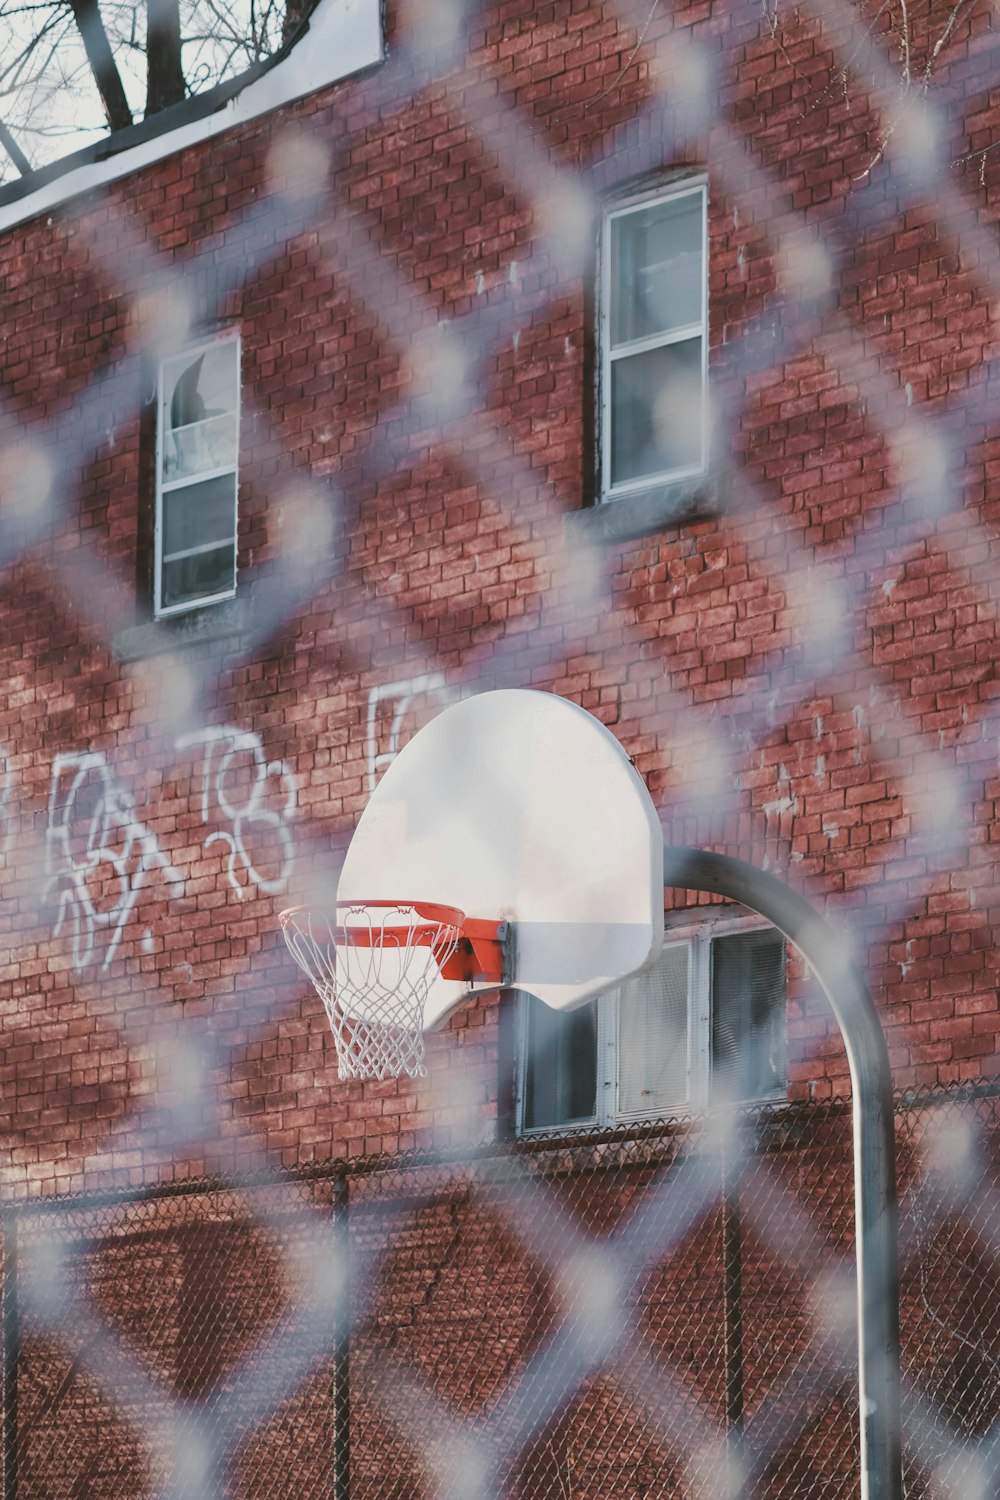 a basketball hoop in front of a brick building